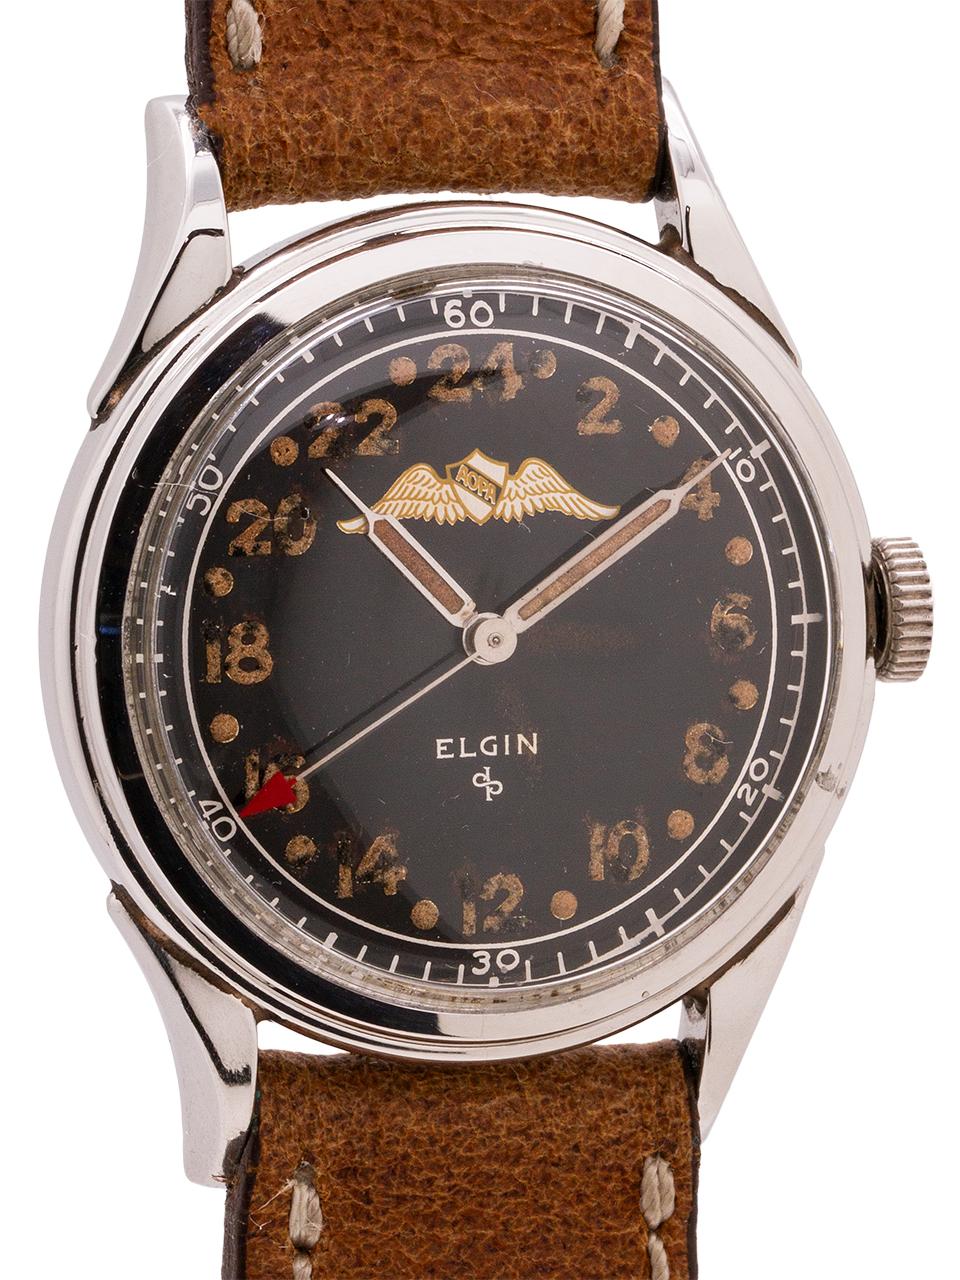 
Before the AOPA began offering their members logo signed Breitling watches, they were offering them with this ultra rare Elgin model with 24 hour dial and with gilded AOPA logo. This watch was only produced for roughly 3 years before the AOPA